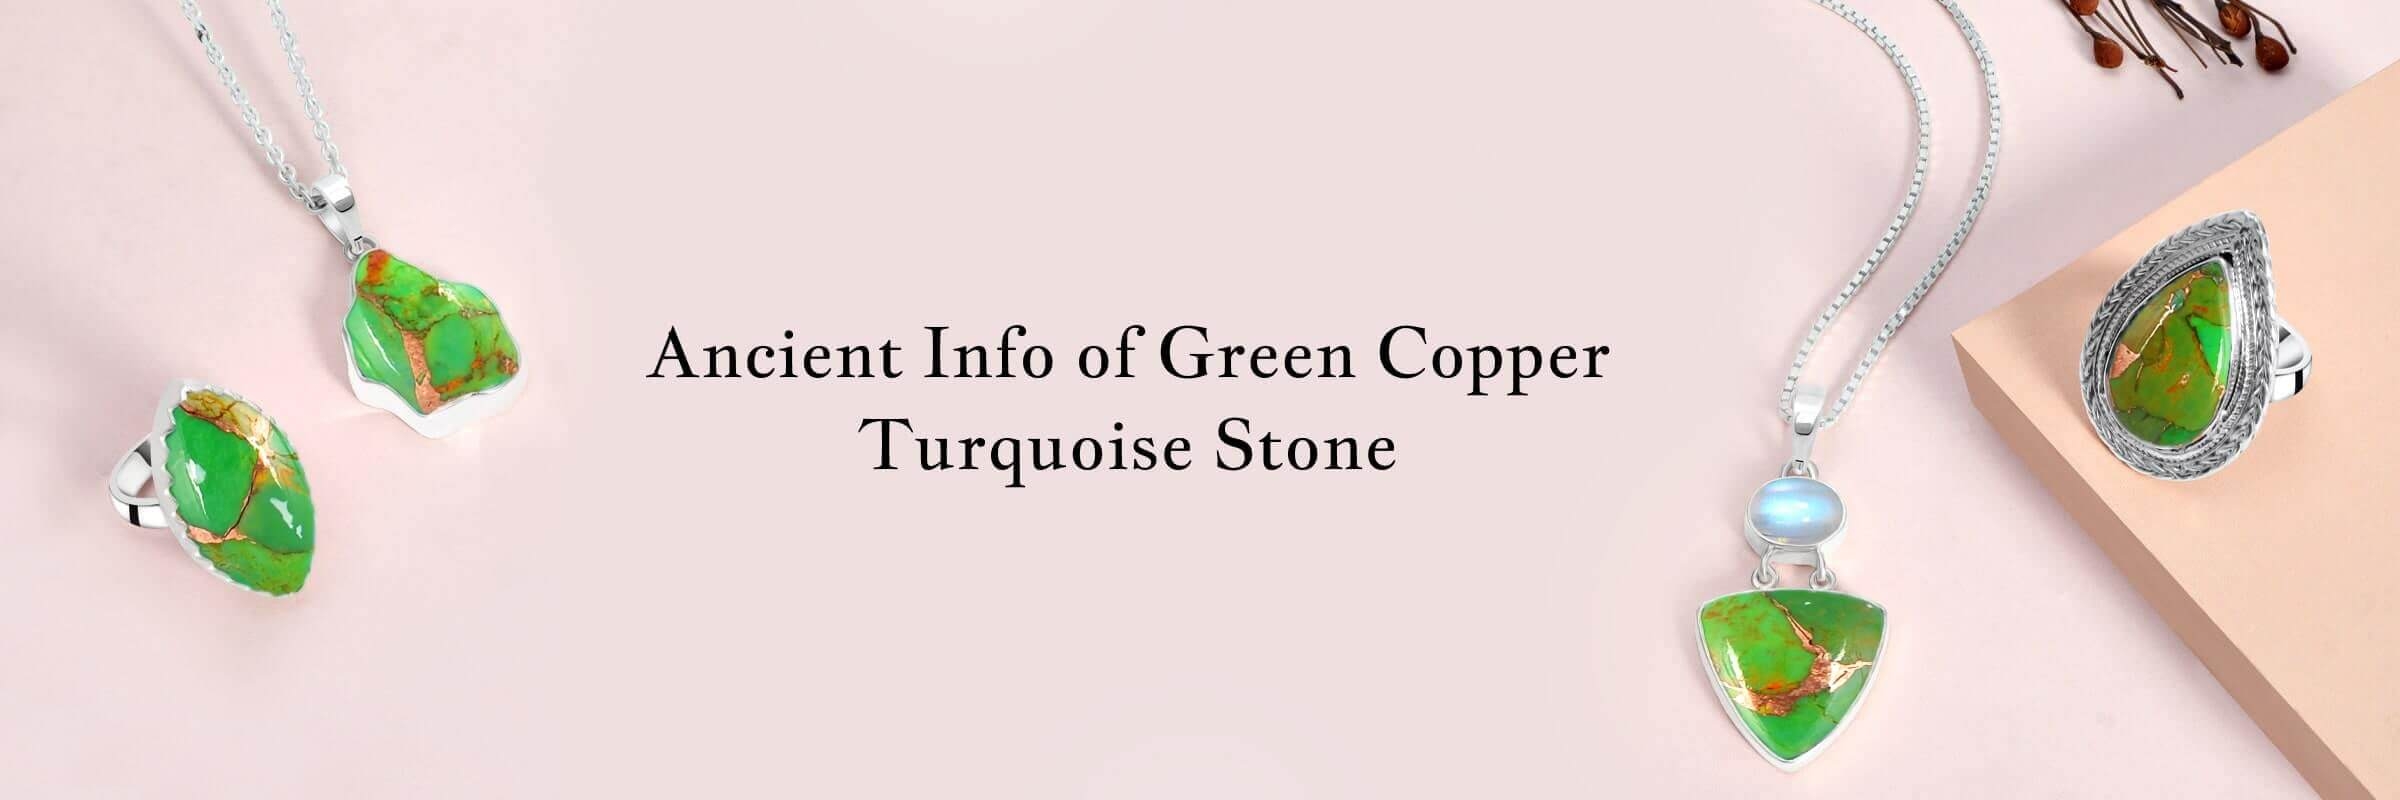 History of Green Copper Turquoise Stone